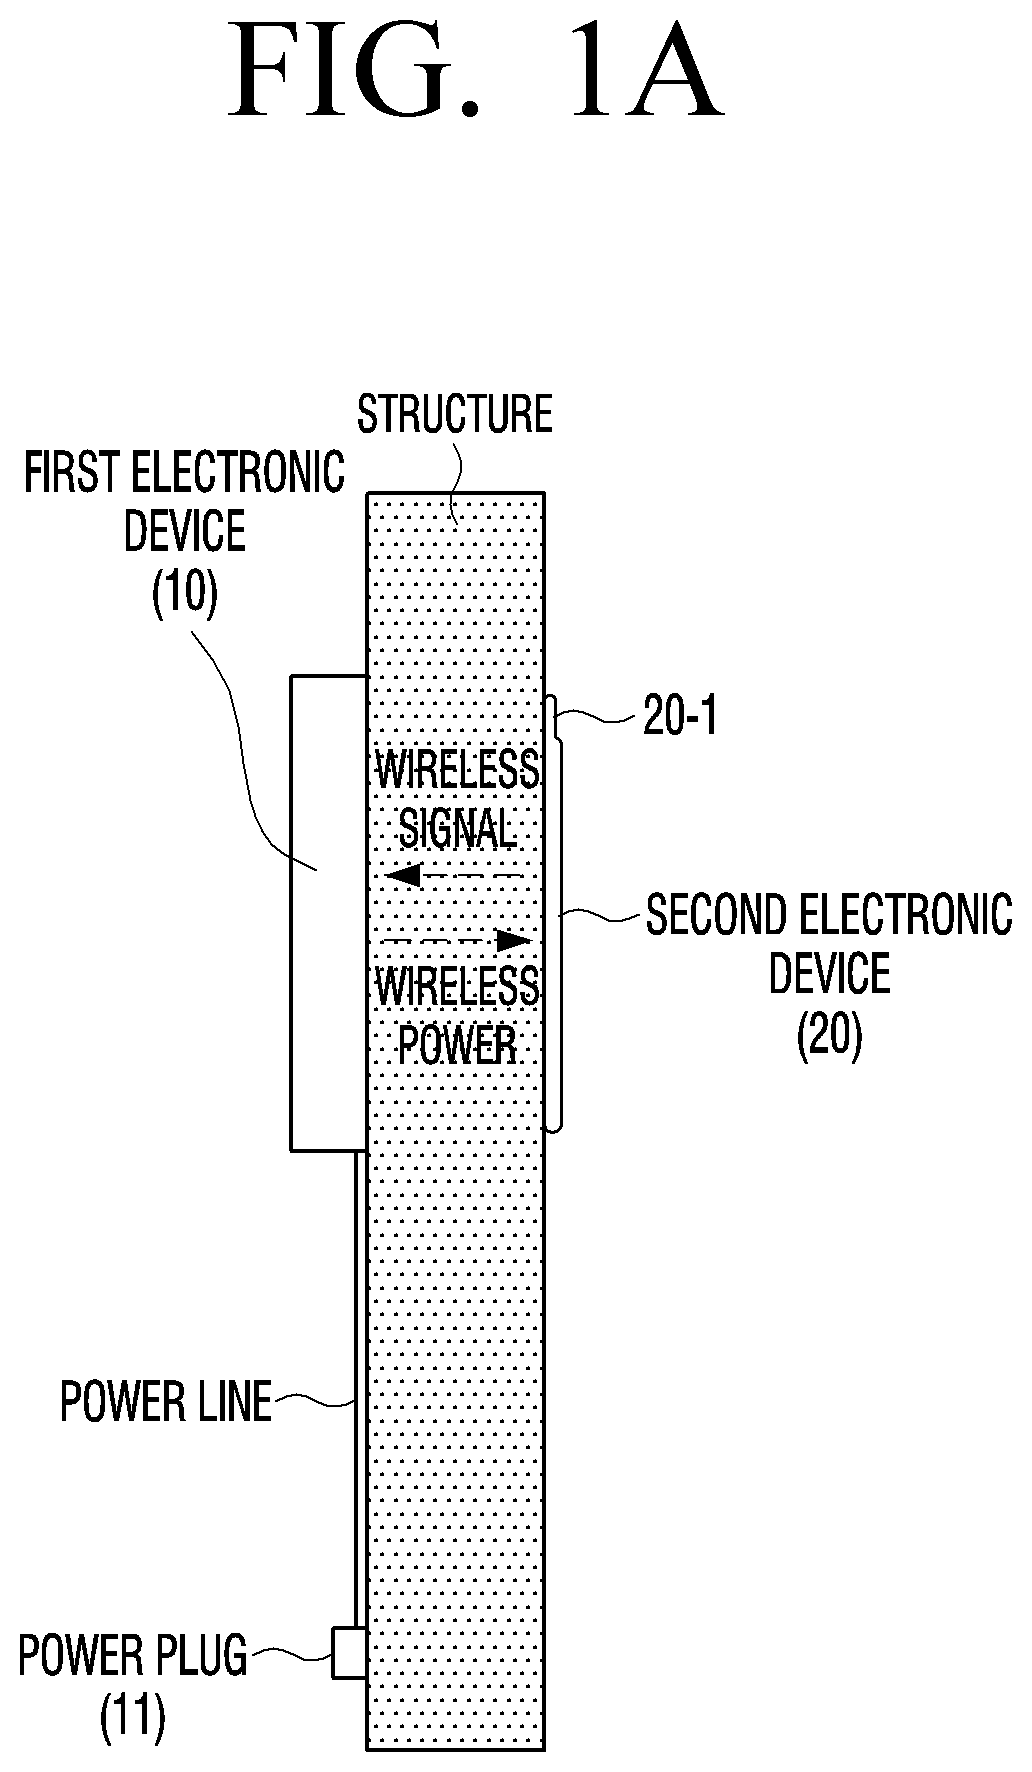 Wireless power transmitting device and method for supplying wireless power thereof